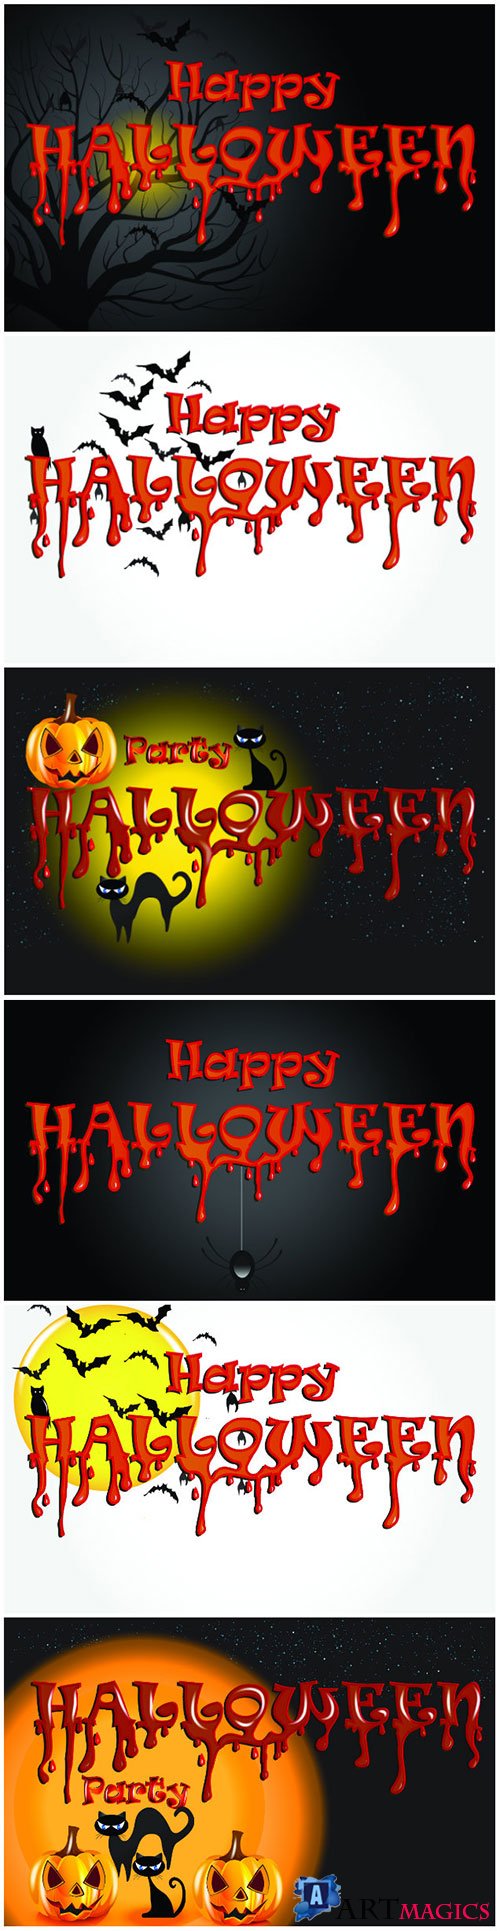 Halloween horror party background